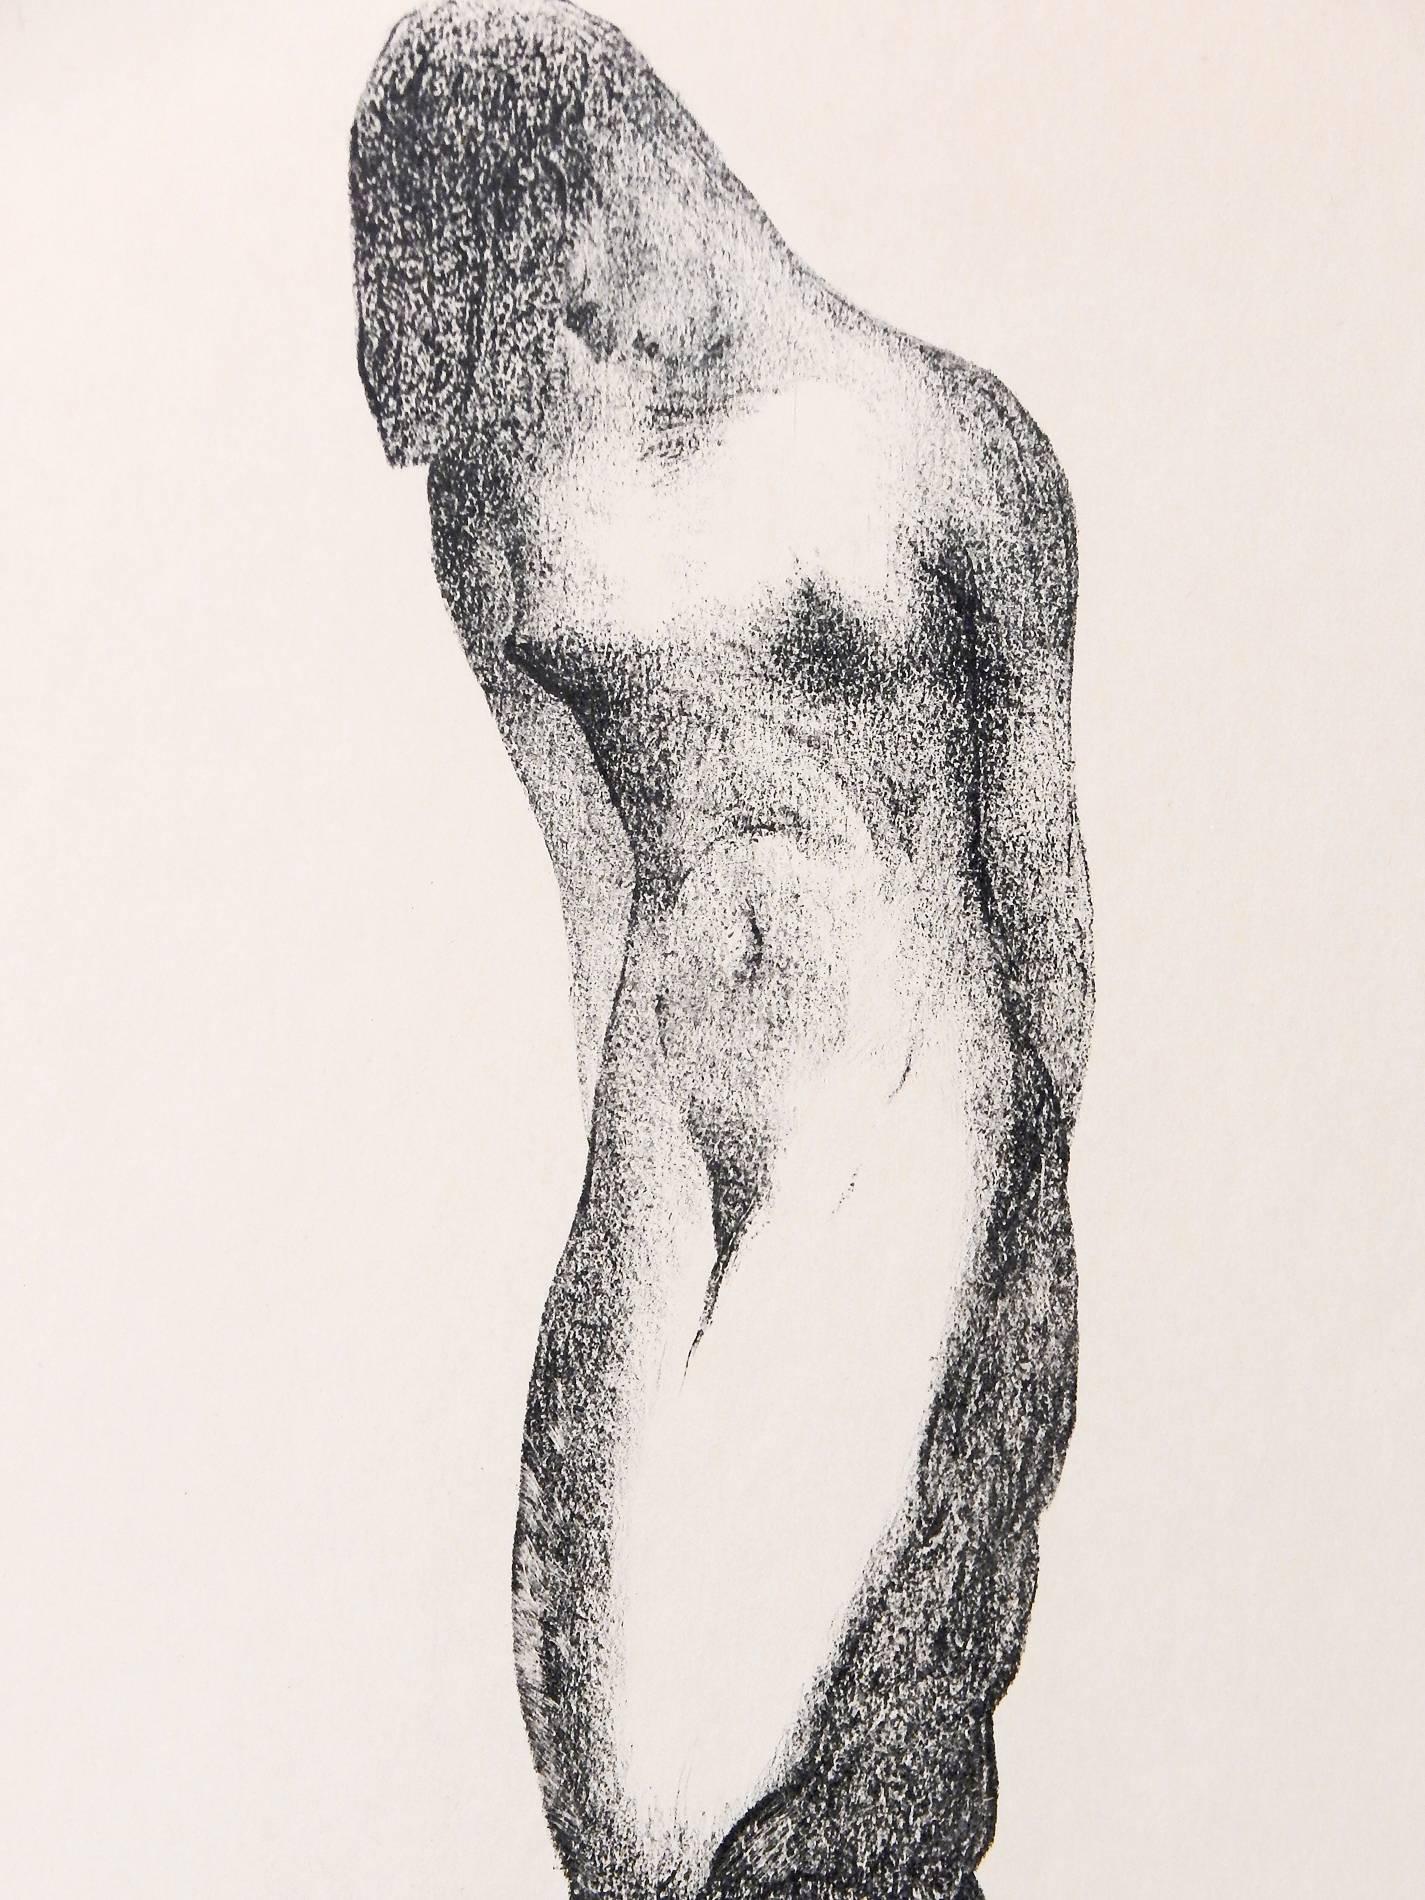 Sensual and sinuous, this very rare print by an American sculptor depicts a nude female figure who is embraced by her nude male lover from below, the male serving as the trunk for the female tree who towers above. The artist, Alexander Portnoff, is